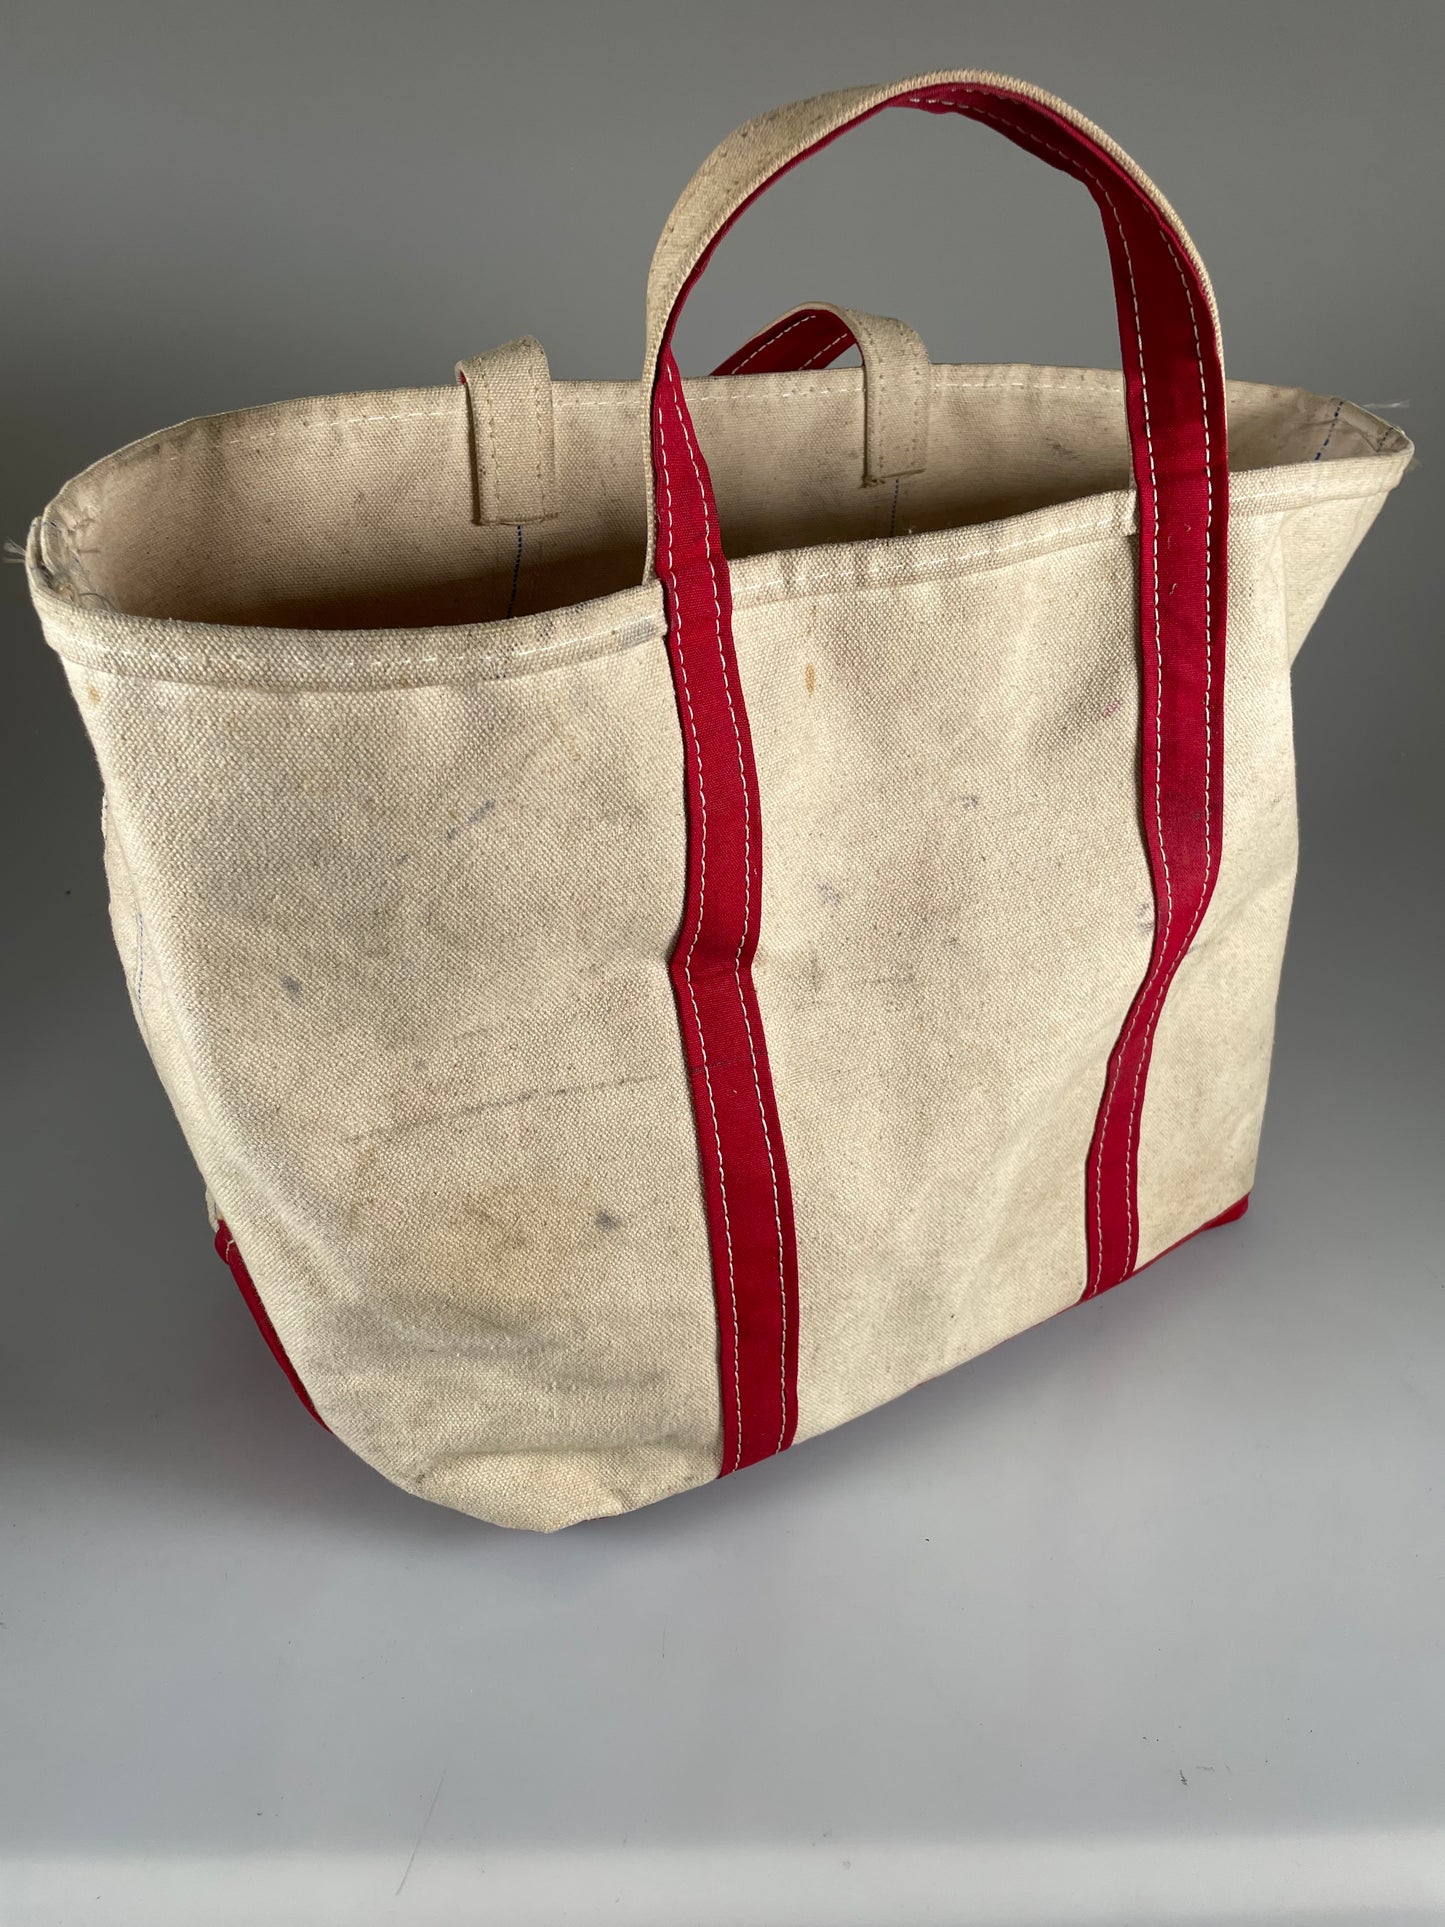 Vintage L.L. Bean Boat and Tote Bag Canvas White Red Strap Large Beach bag